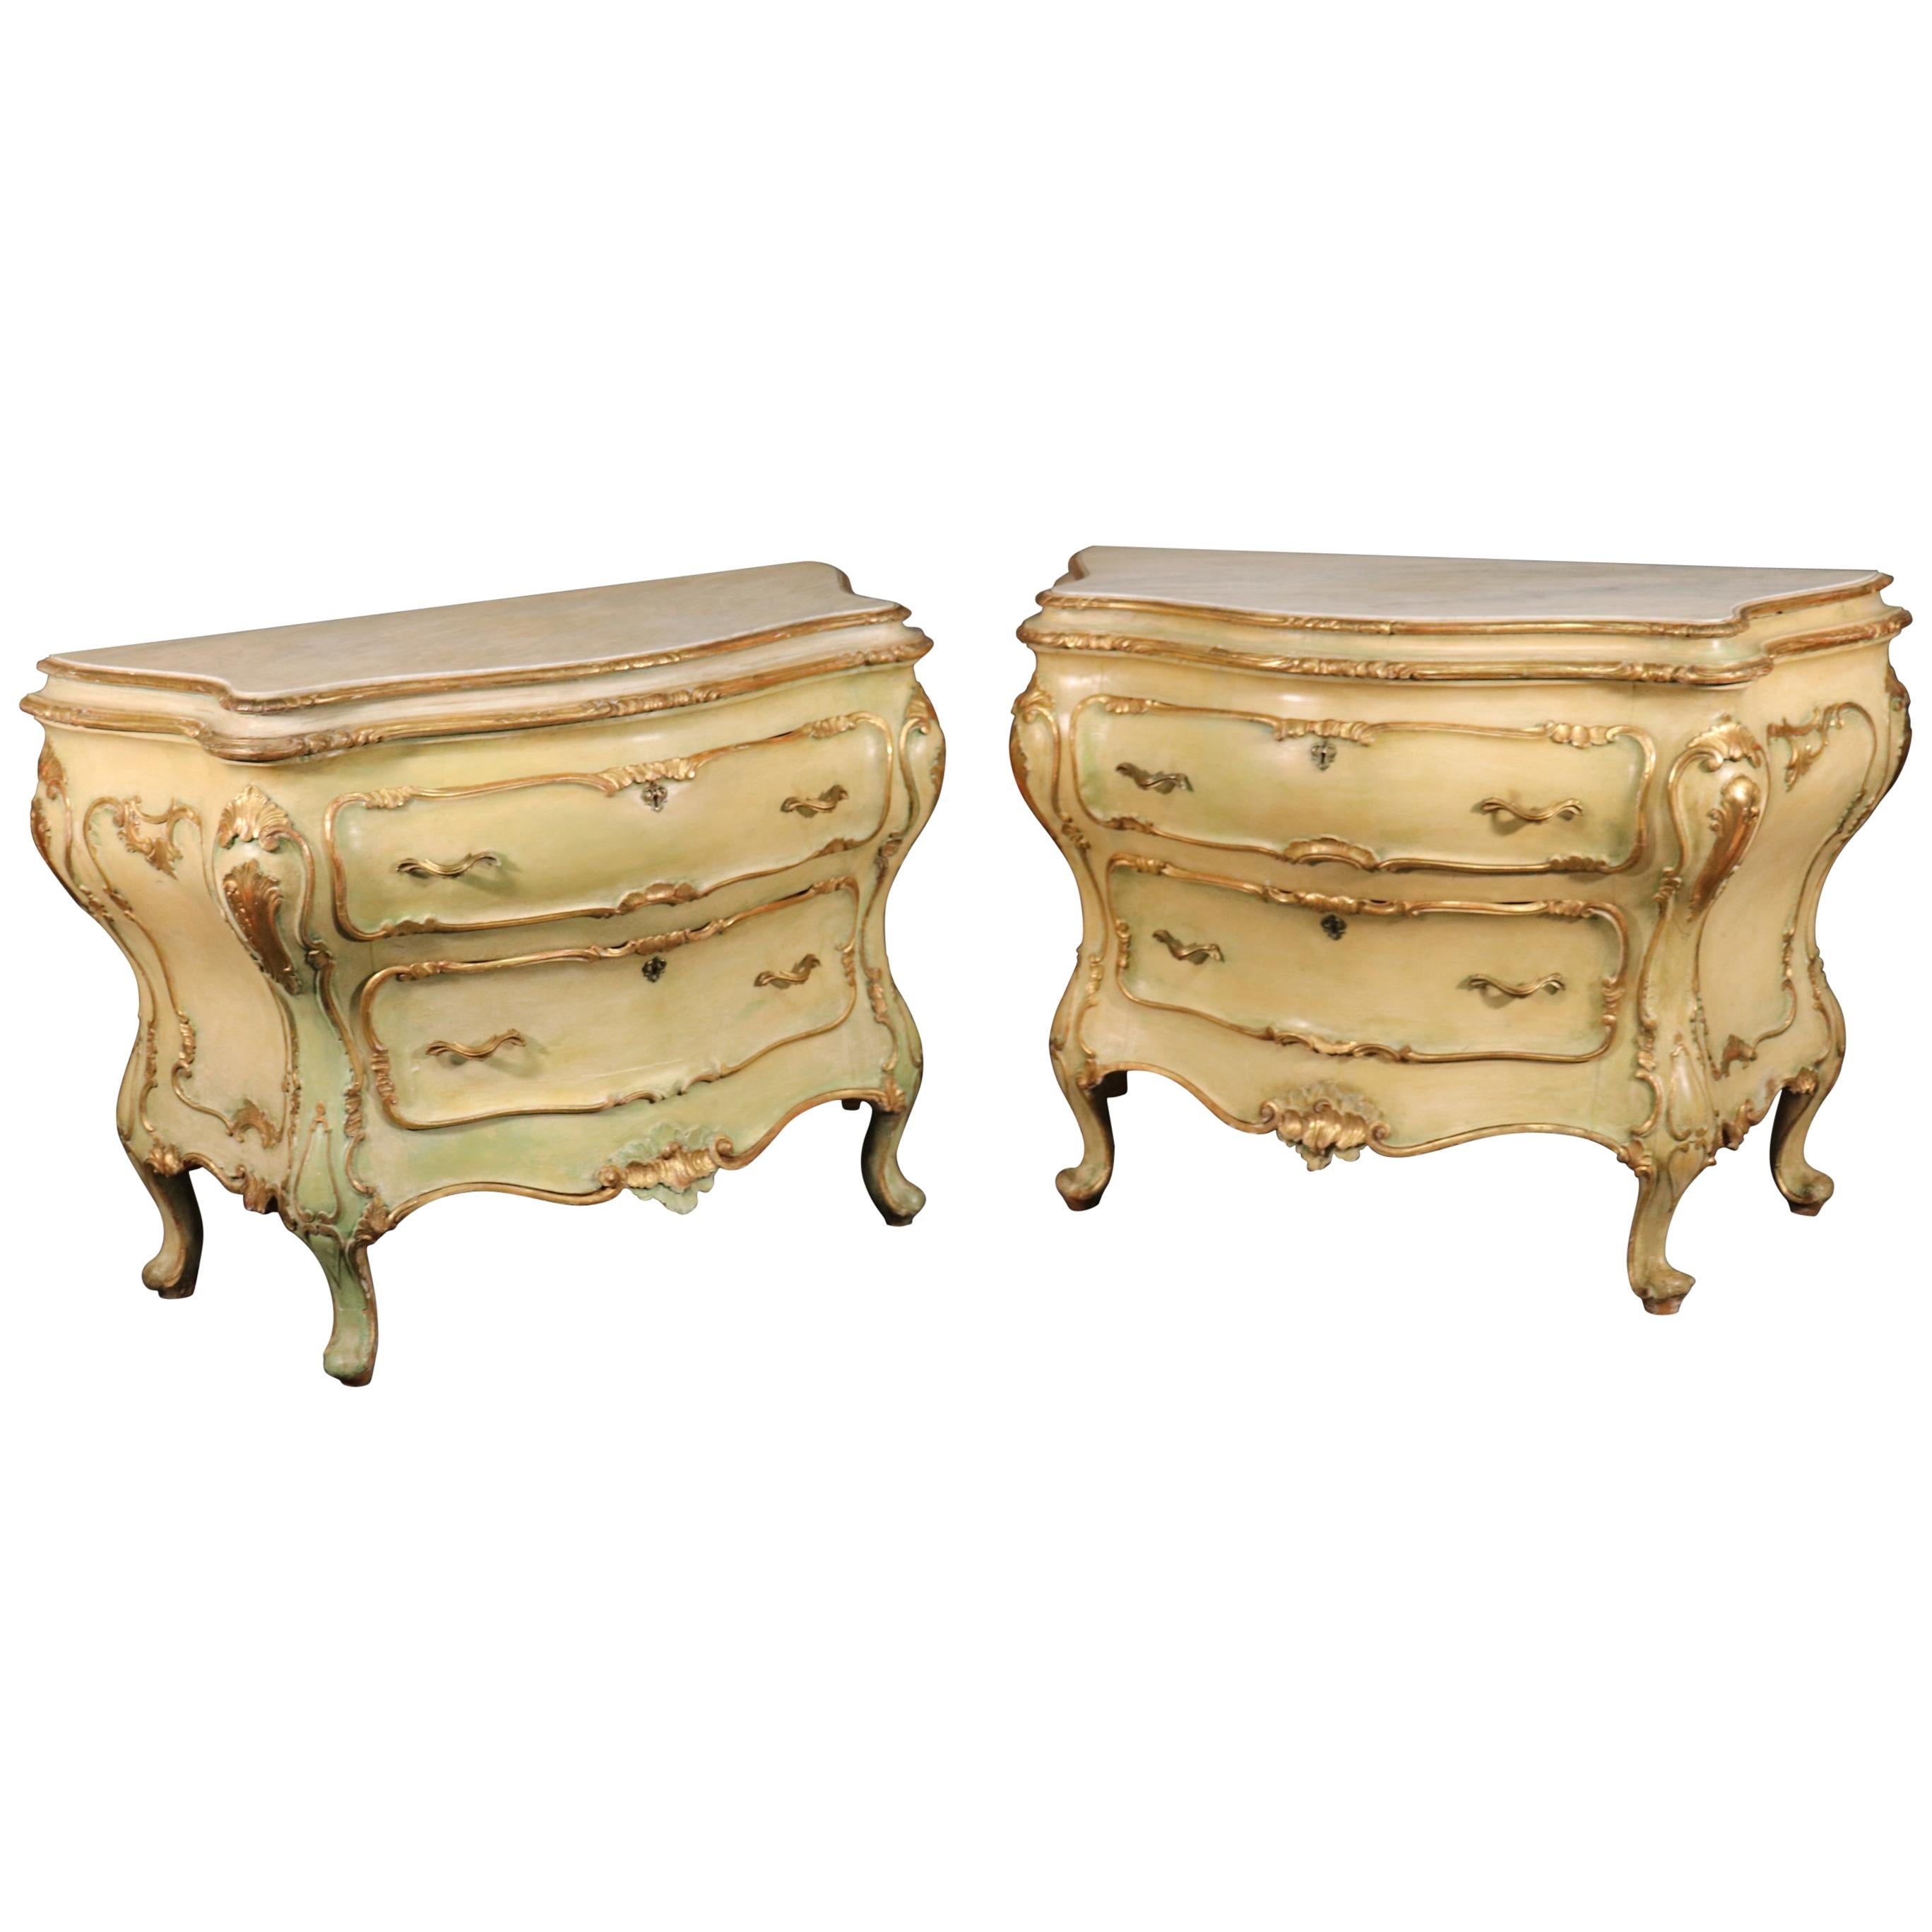 Pair Fine Large Italian Painted Marble Top Rococo Commodes Dressers 1930s Era For Sale